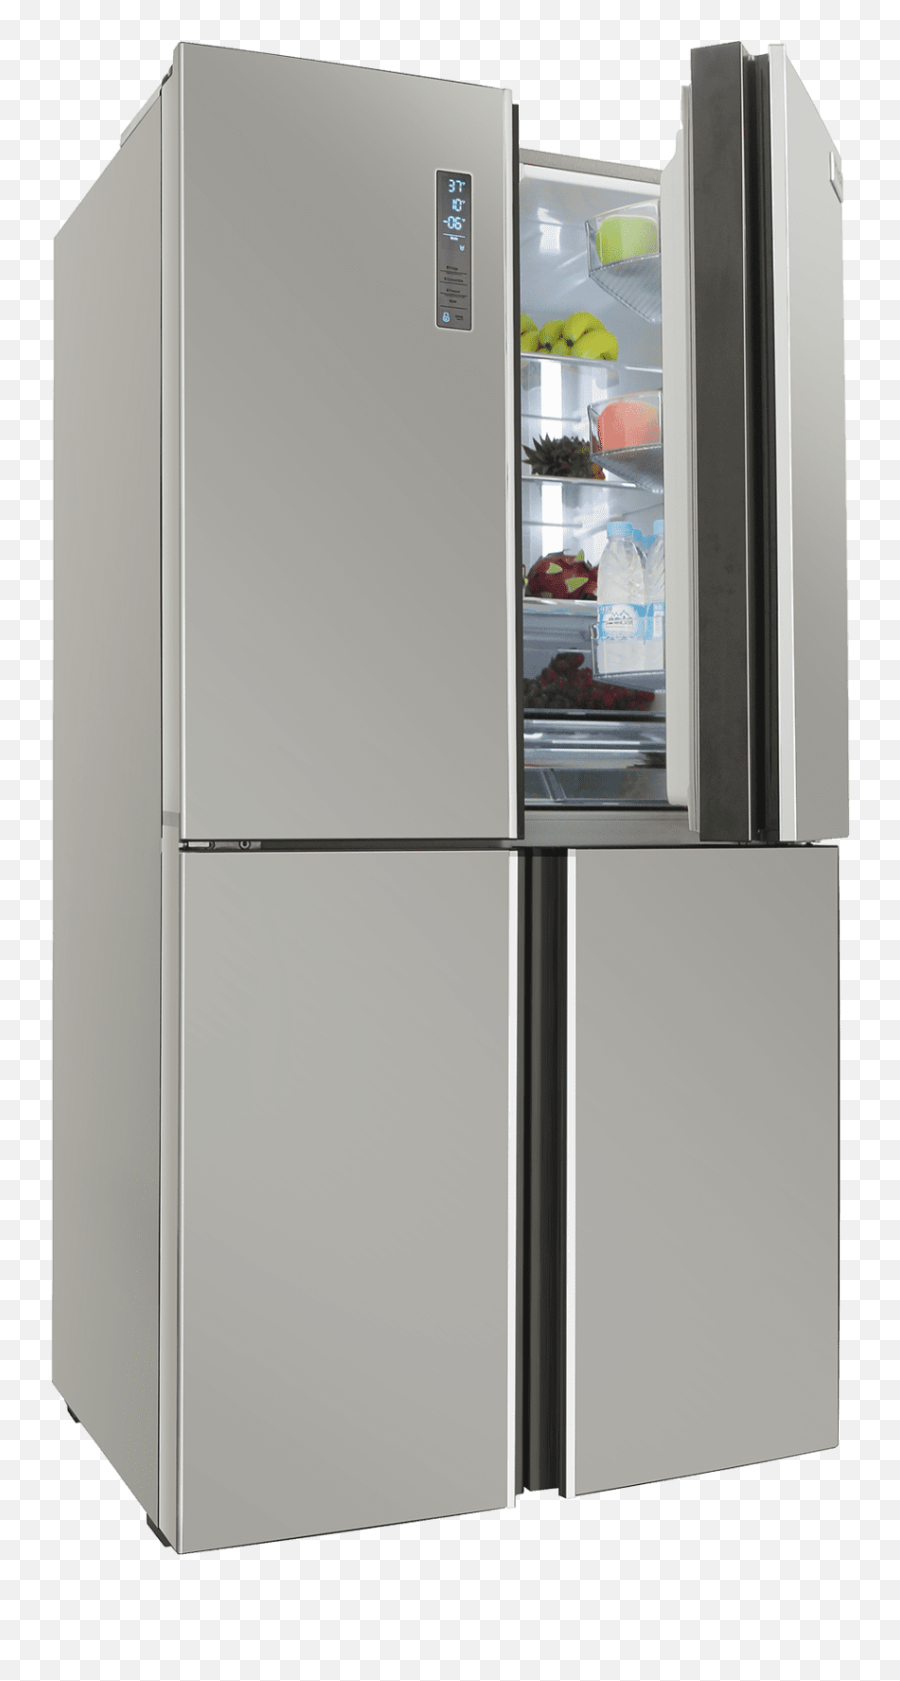 Hrf3603f Thor Kitchen 36 Inch French - Imperial 4 Door Refrigerator Png,Klipsch Icon Kf 26